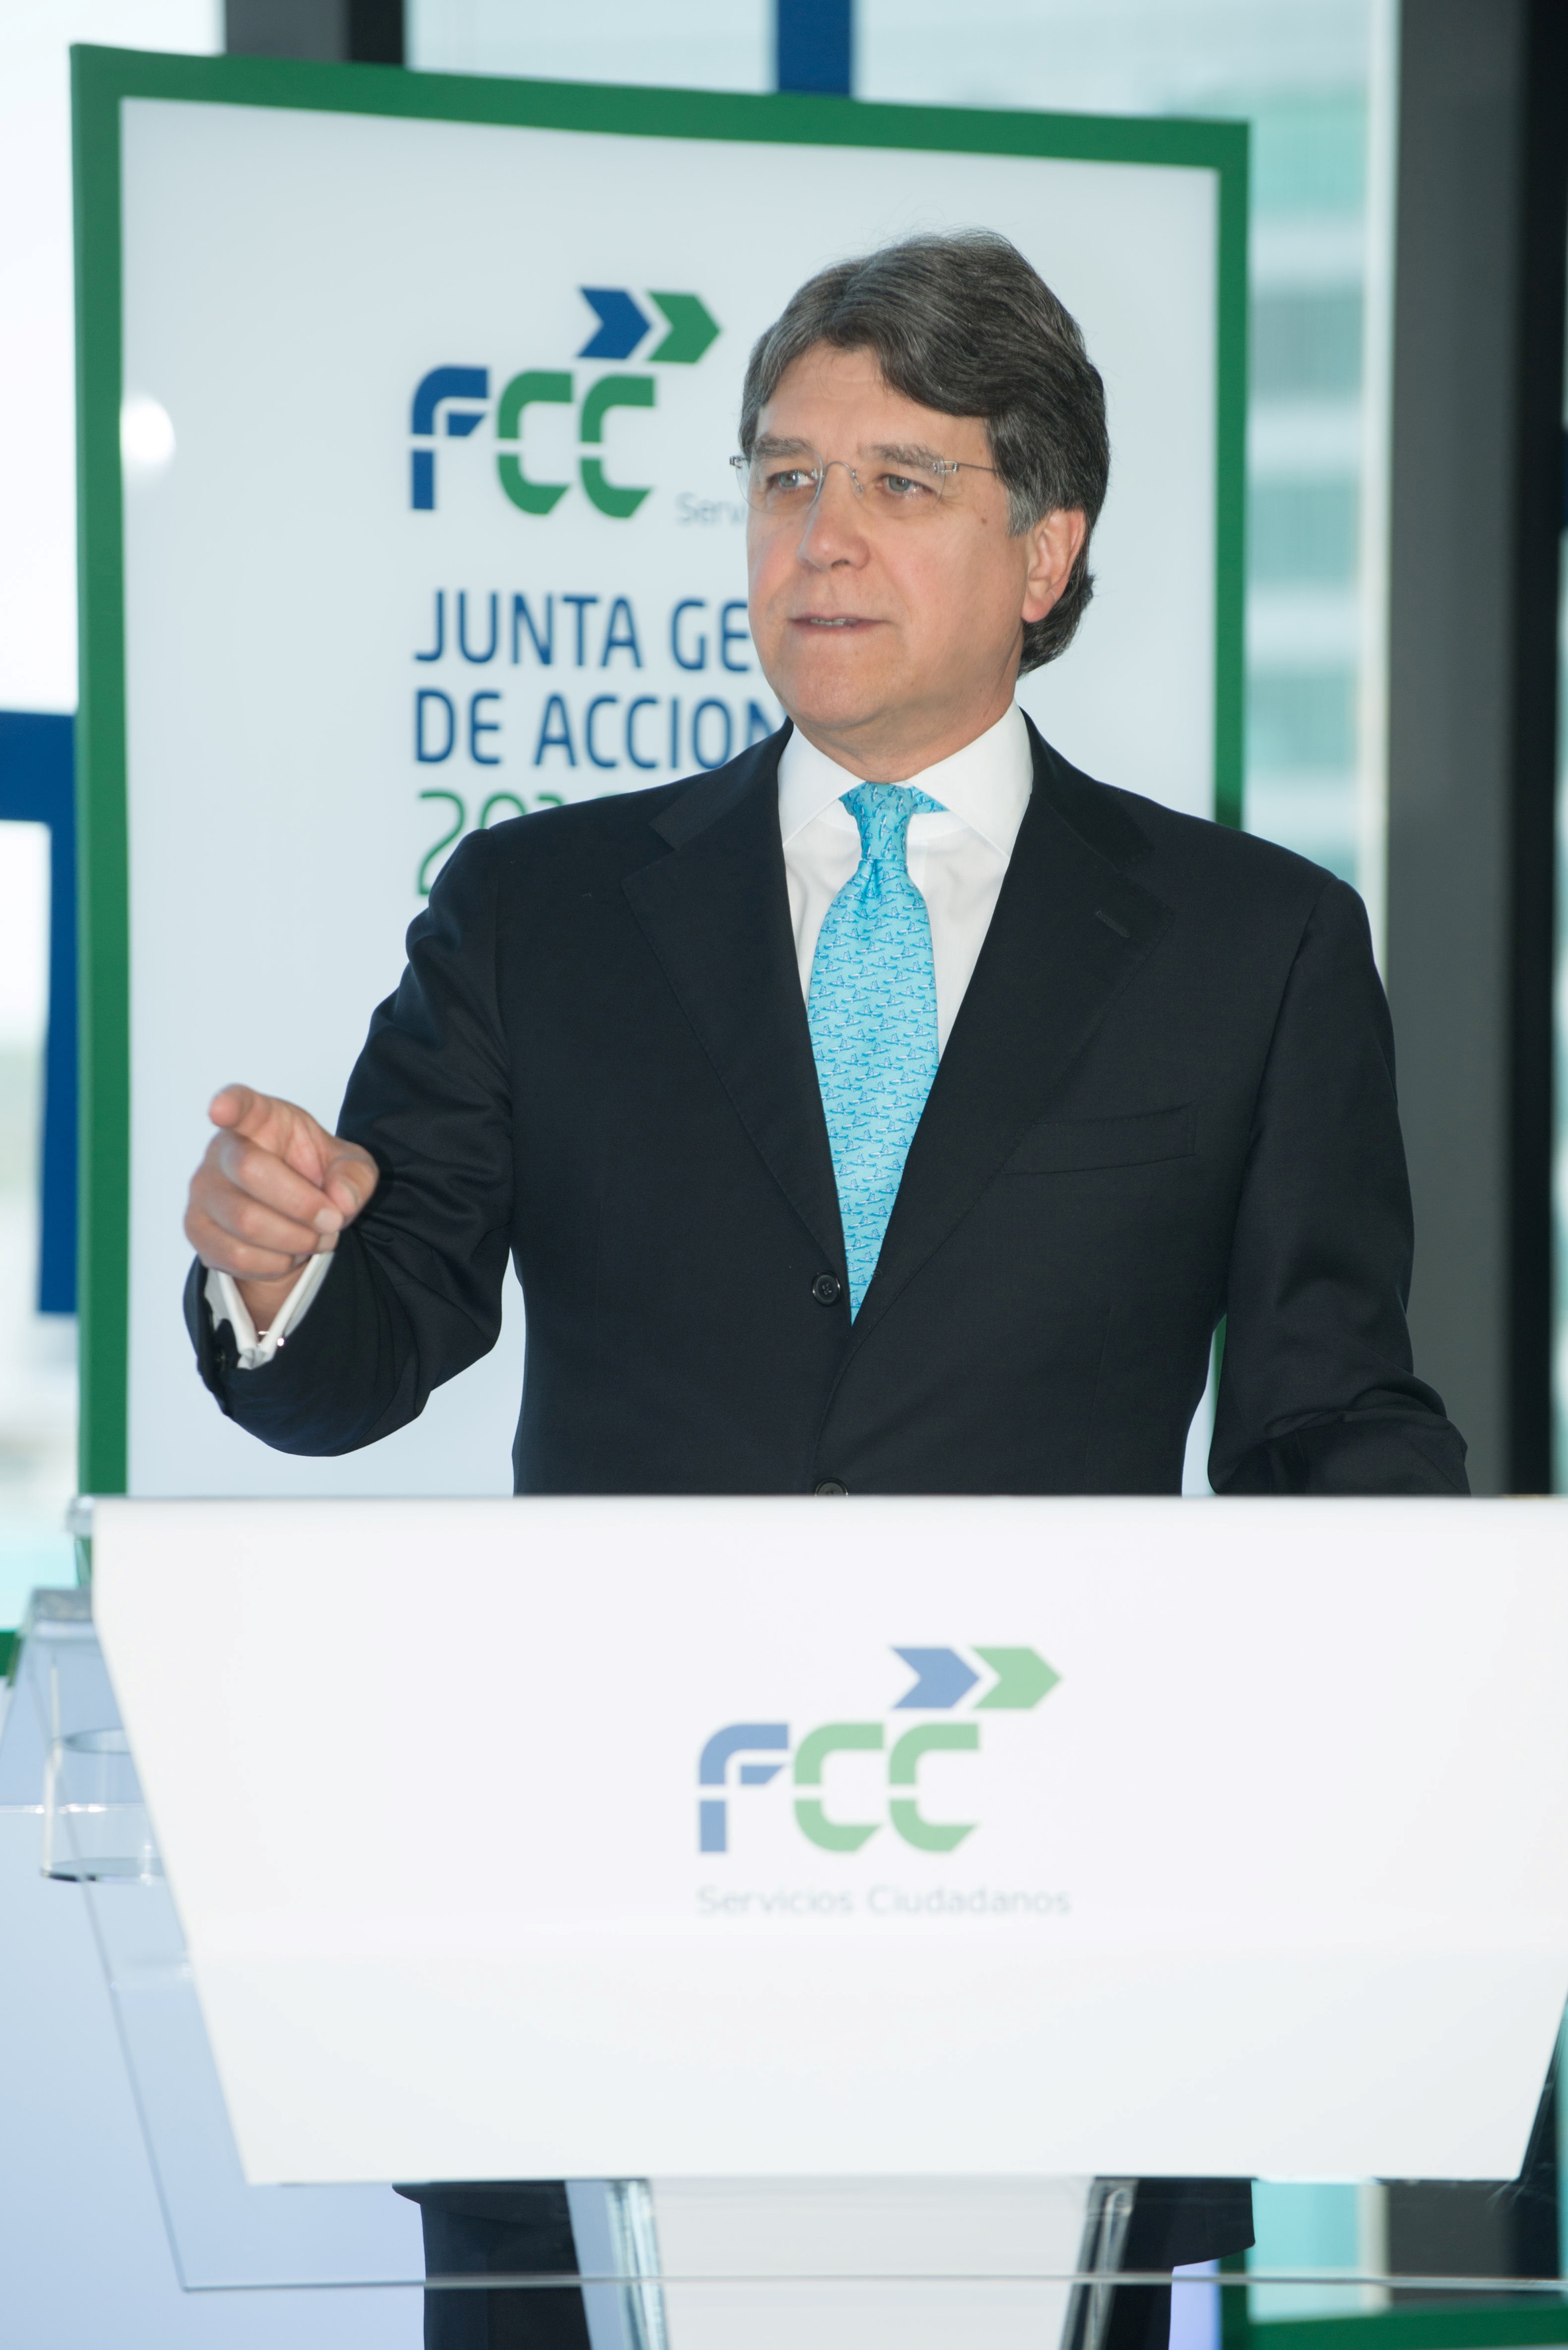 Carlos M. Jarque, Group CEO, during his speech at FCC Shareholders´ meeting 2016